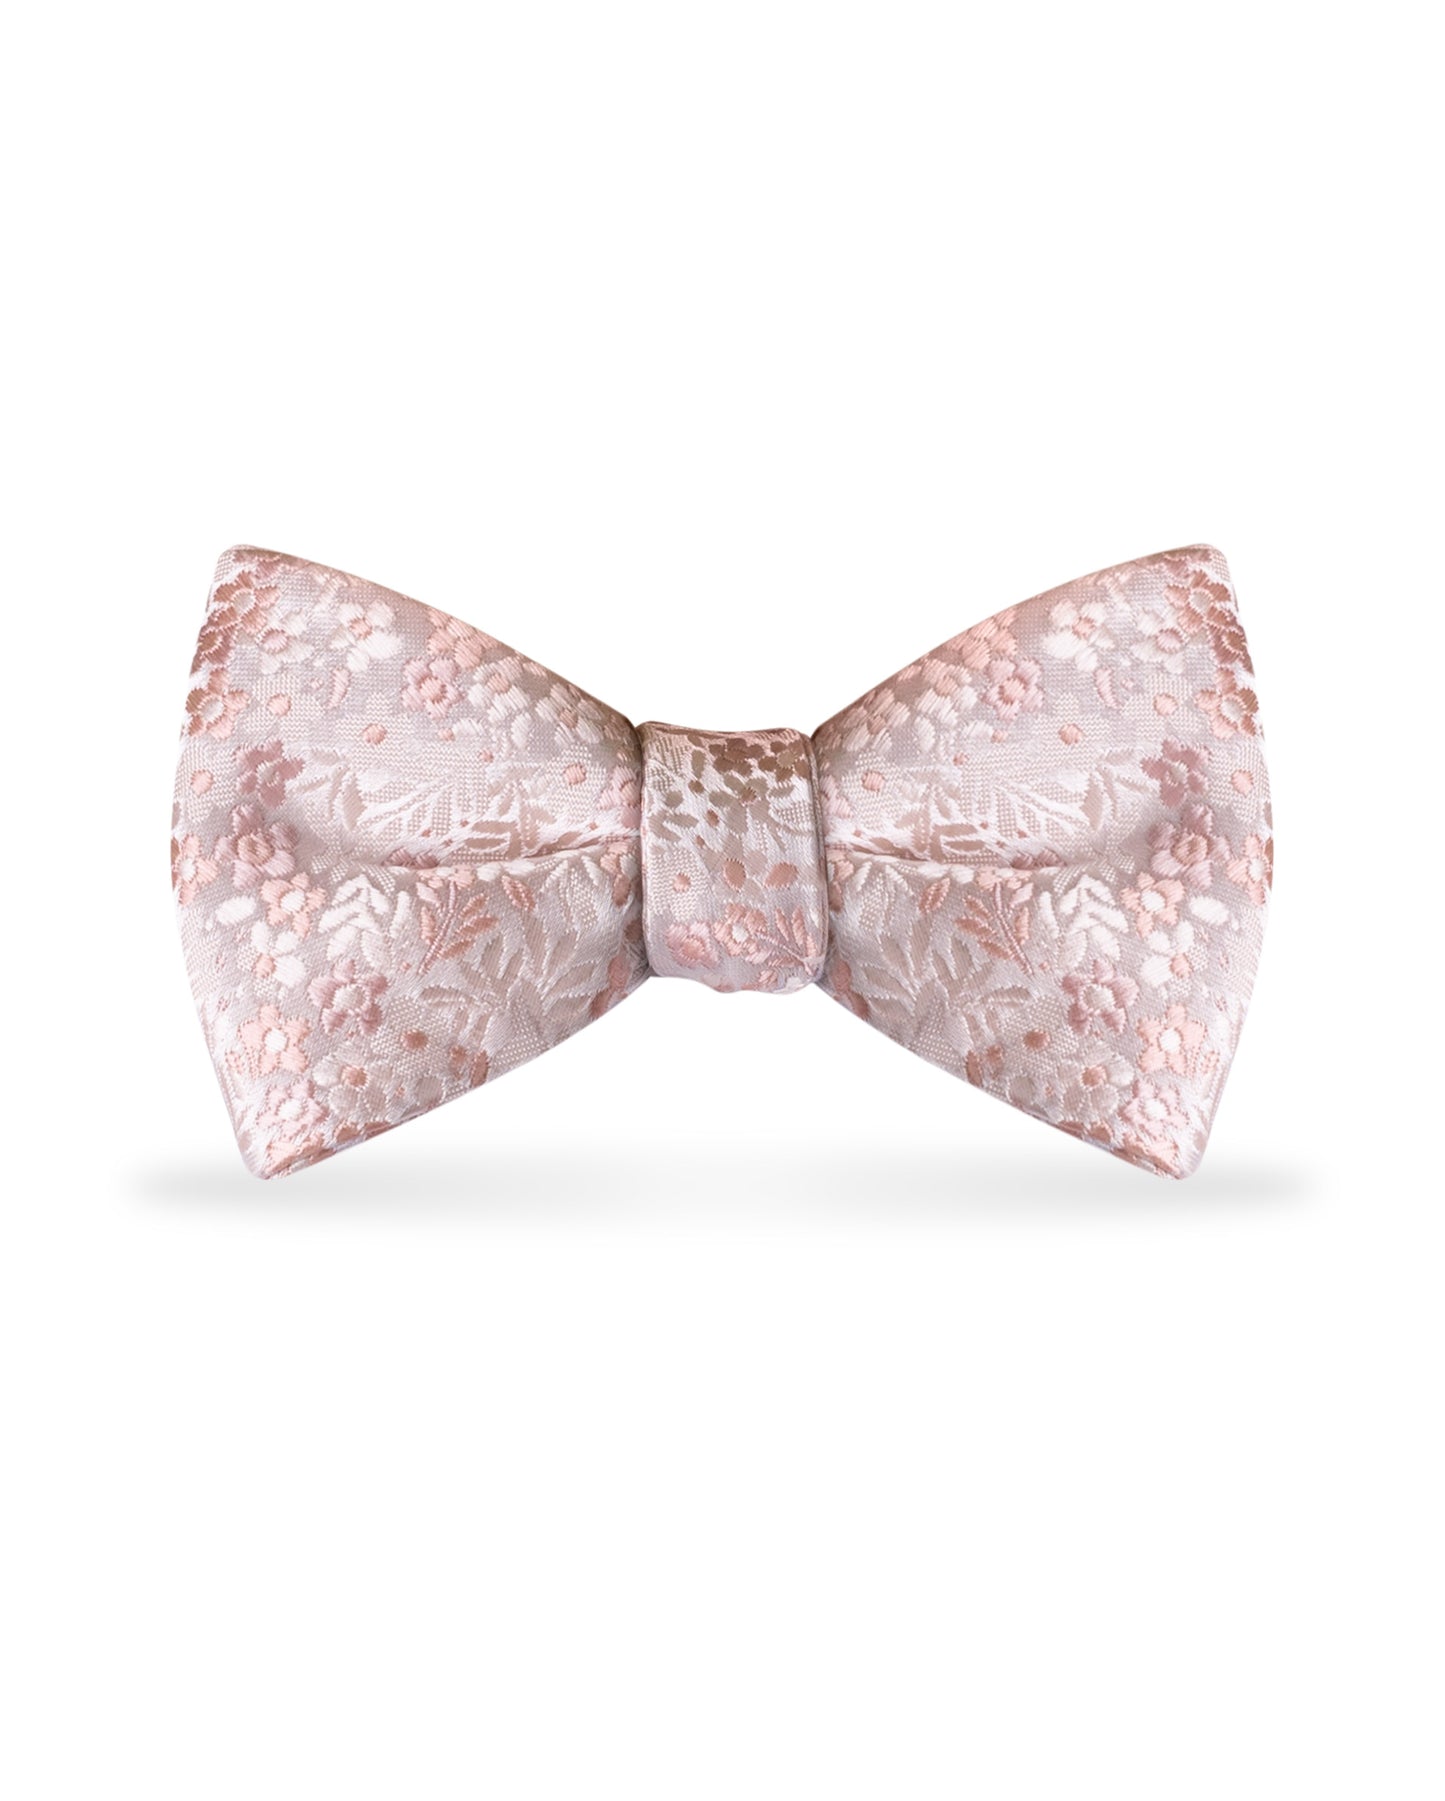 Floral Blush Bow Tie NBFBH